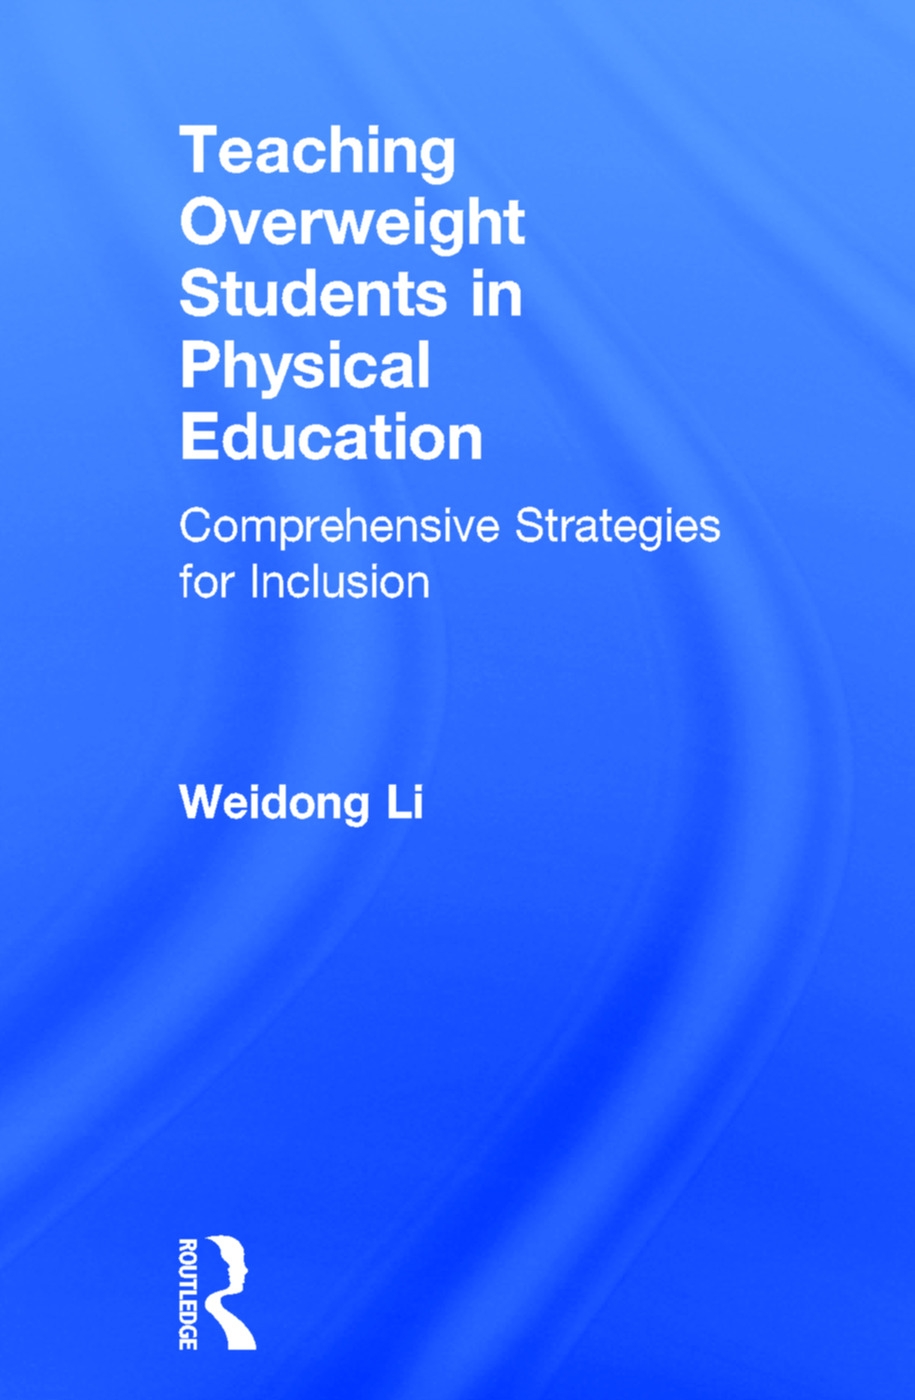 Teaching Overweight Students in Physical Education: Comprehensive Strategies for Inclusion